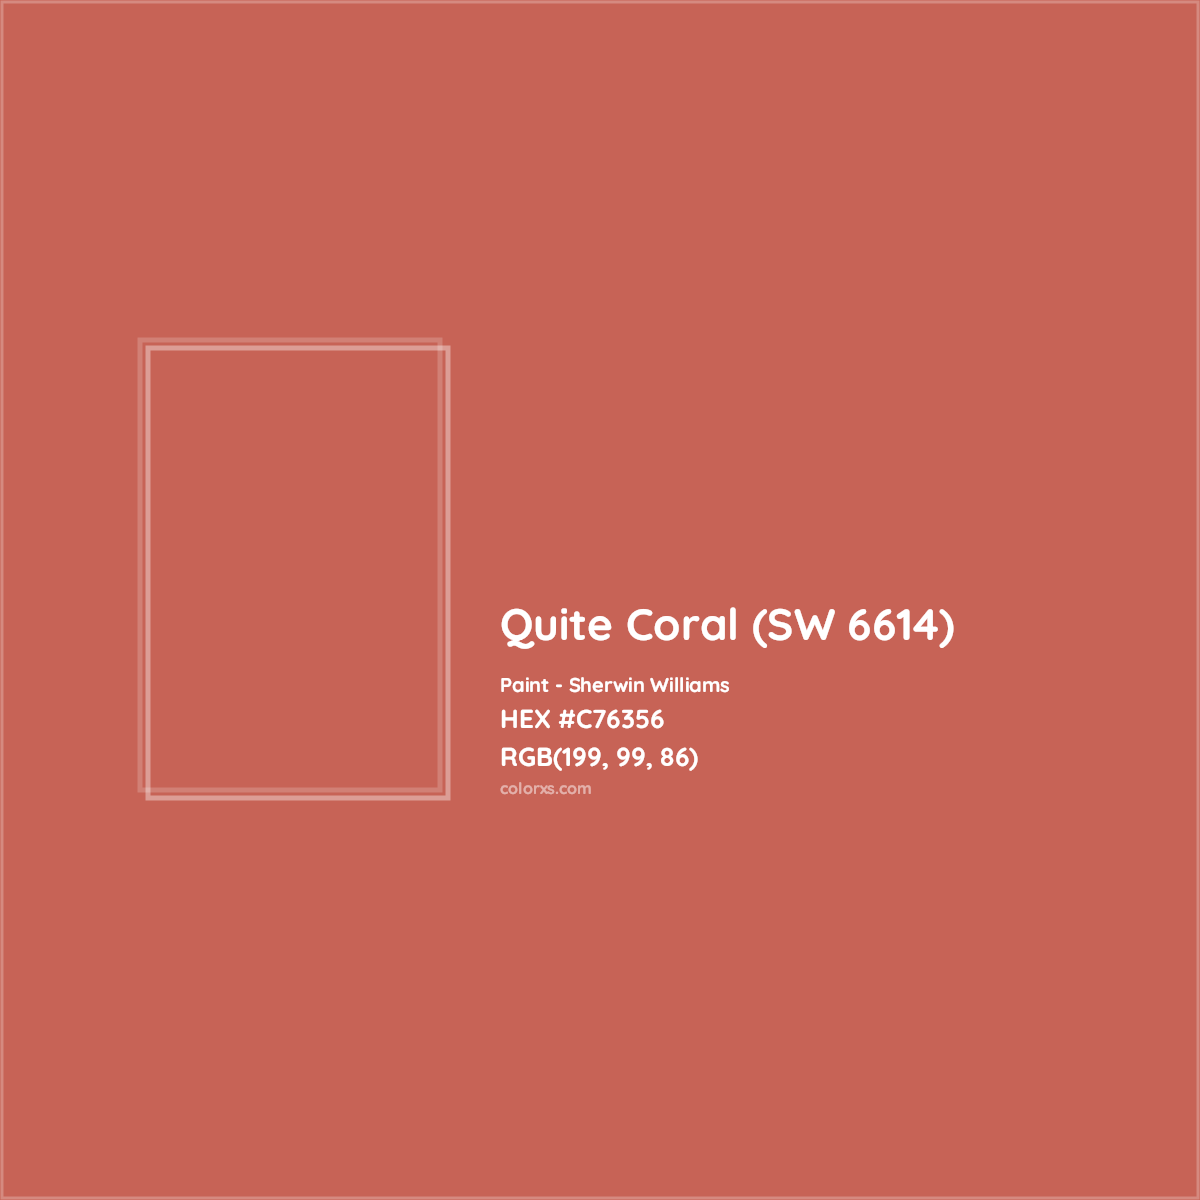 HEX #C76356 Quite Coral (SW 6614) Paint Sherwin Williams - Color Code